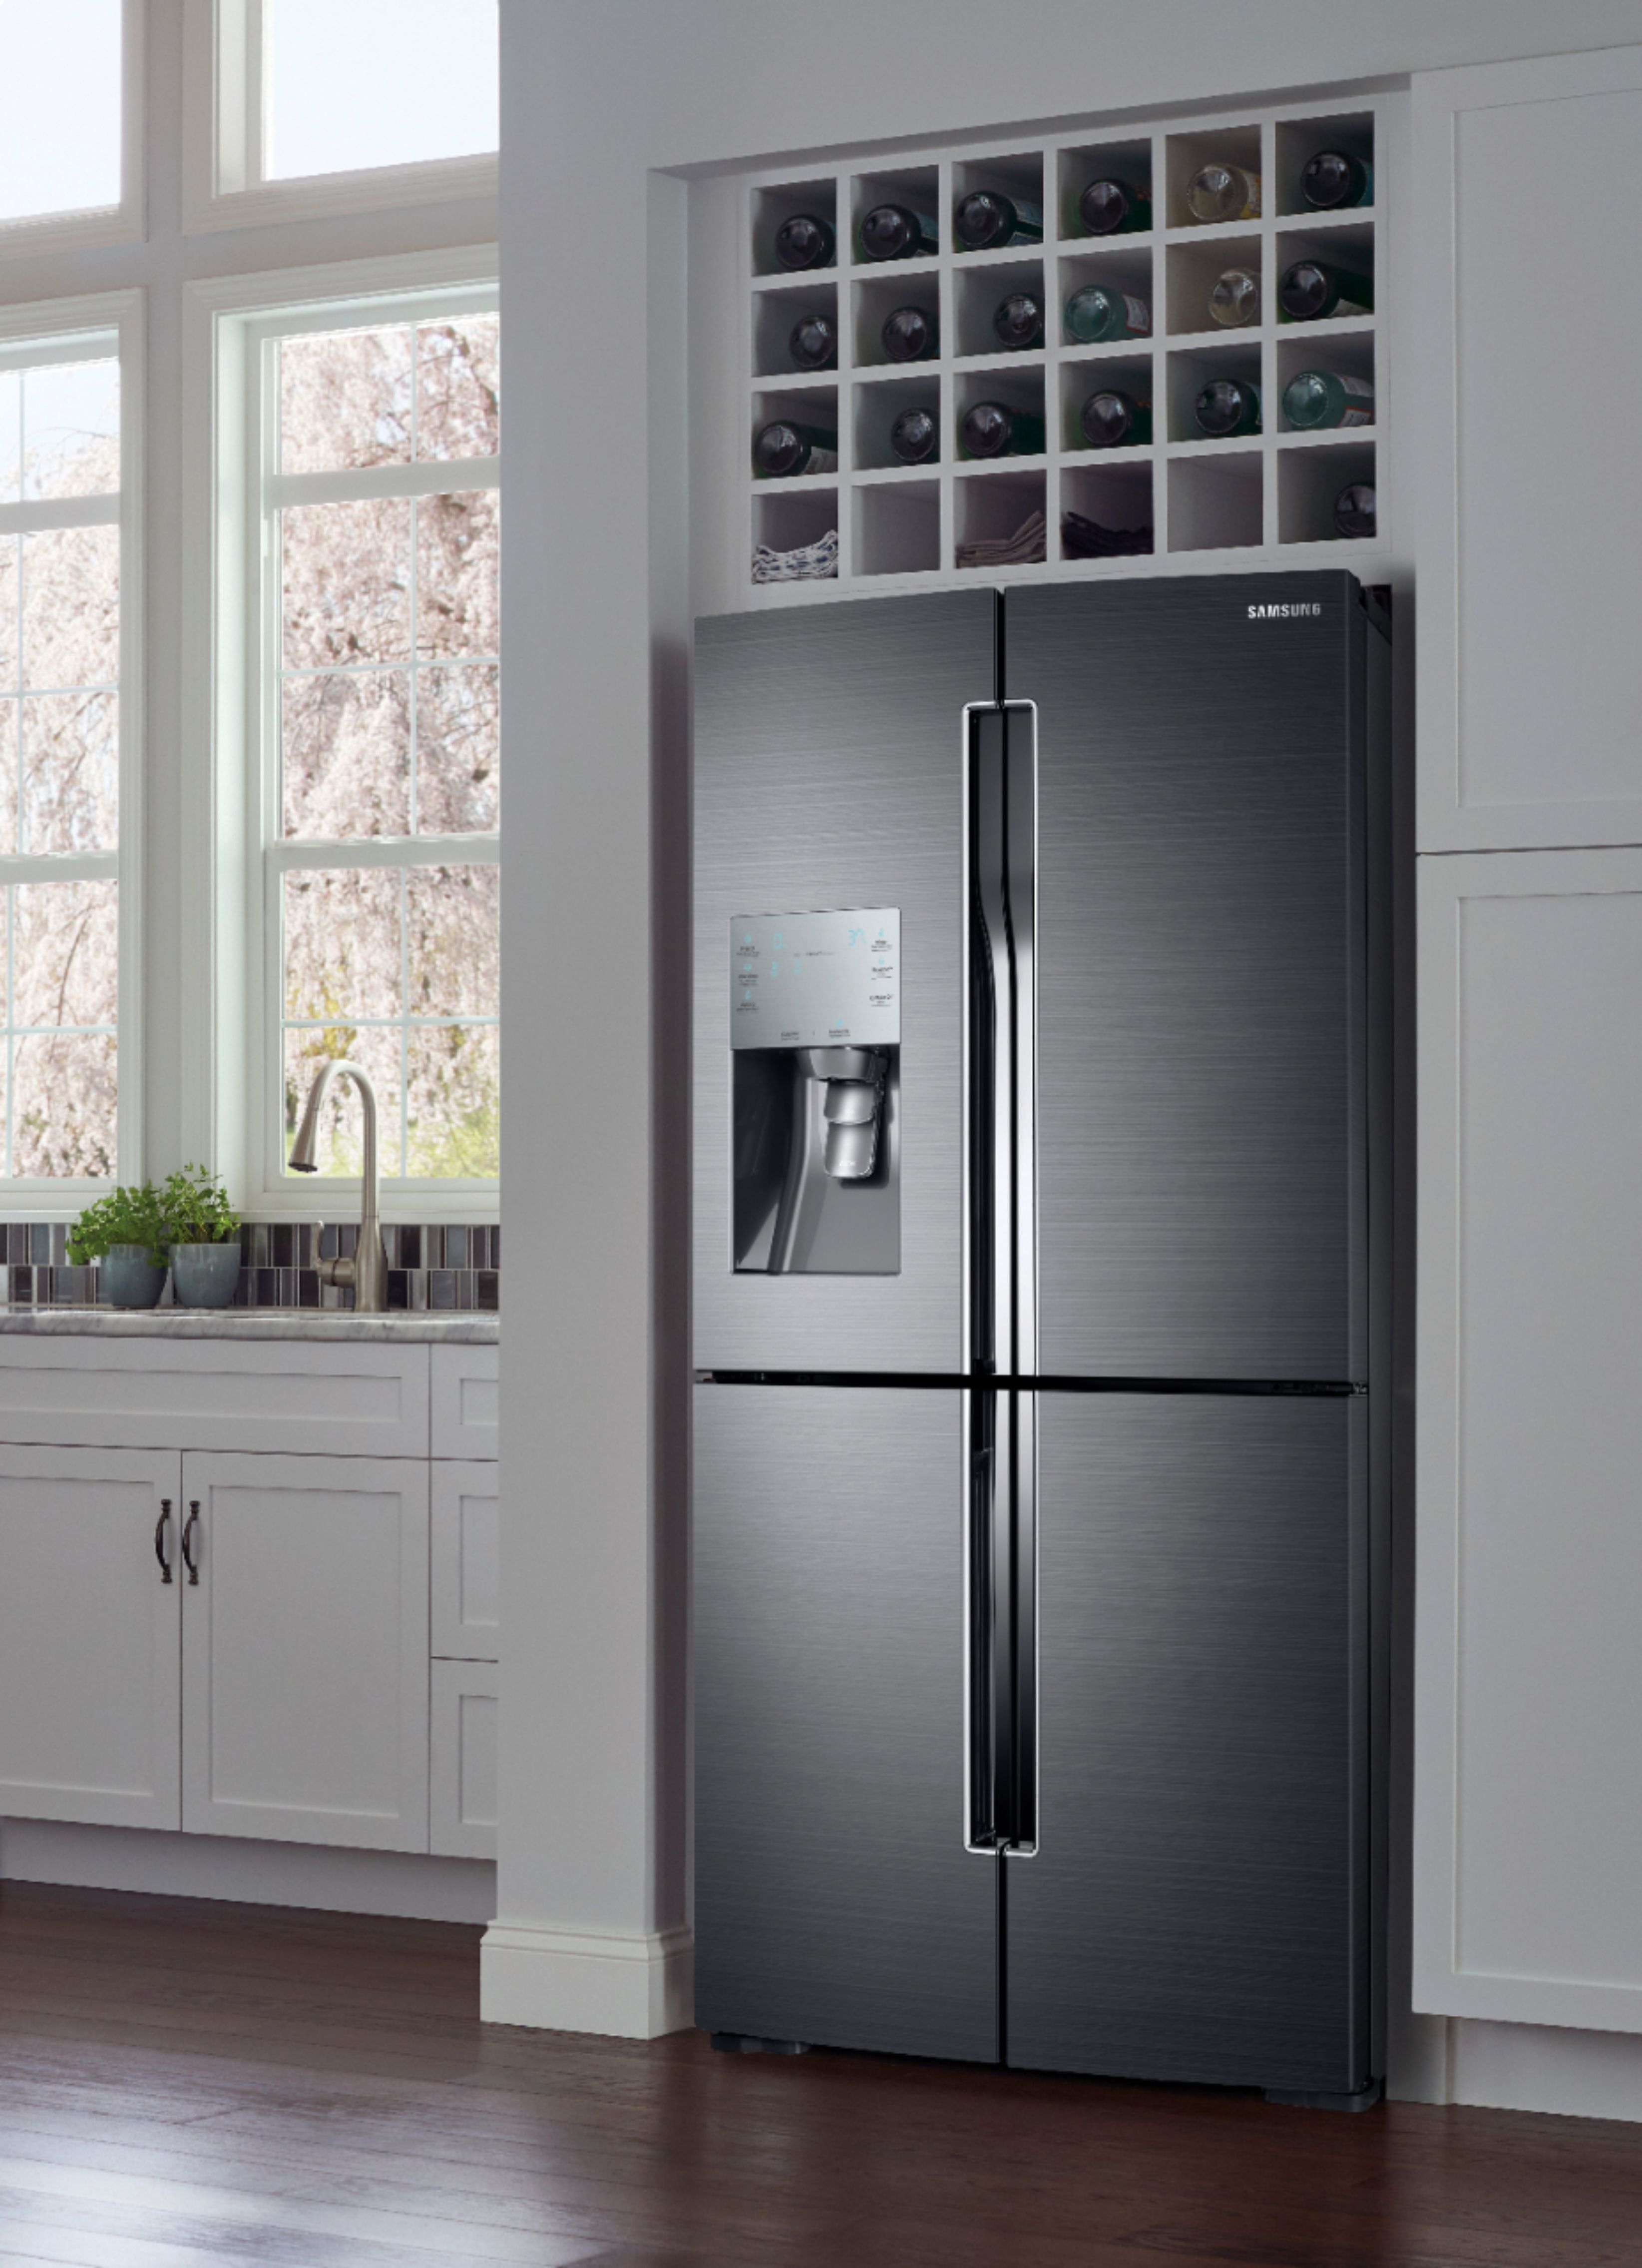 How To Reset Water Filter On A Samsung Fridge